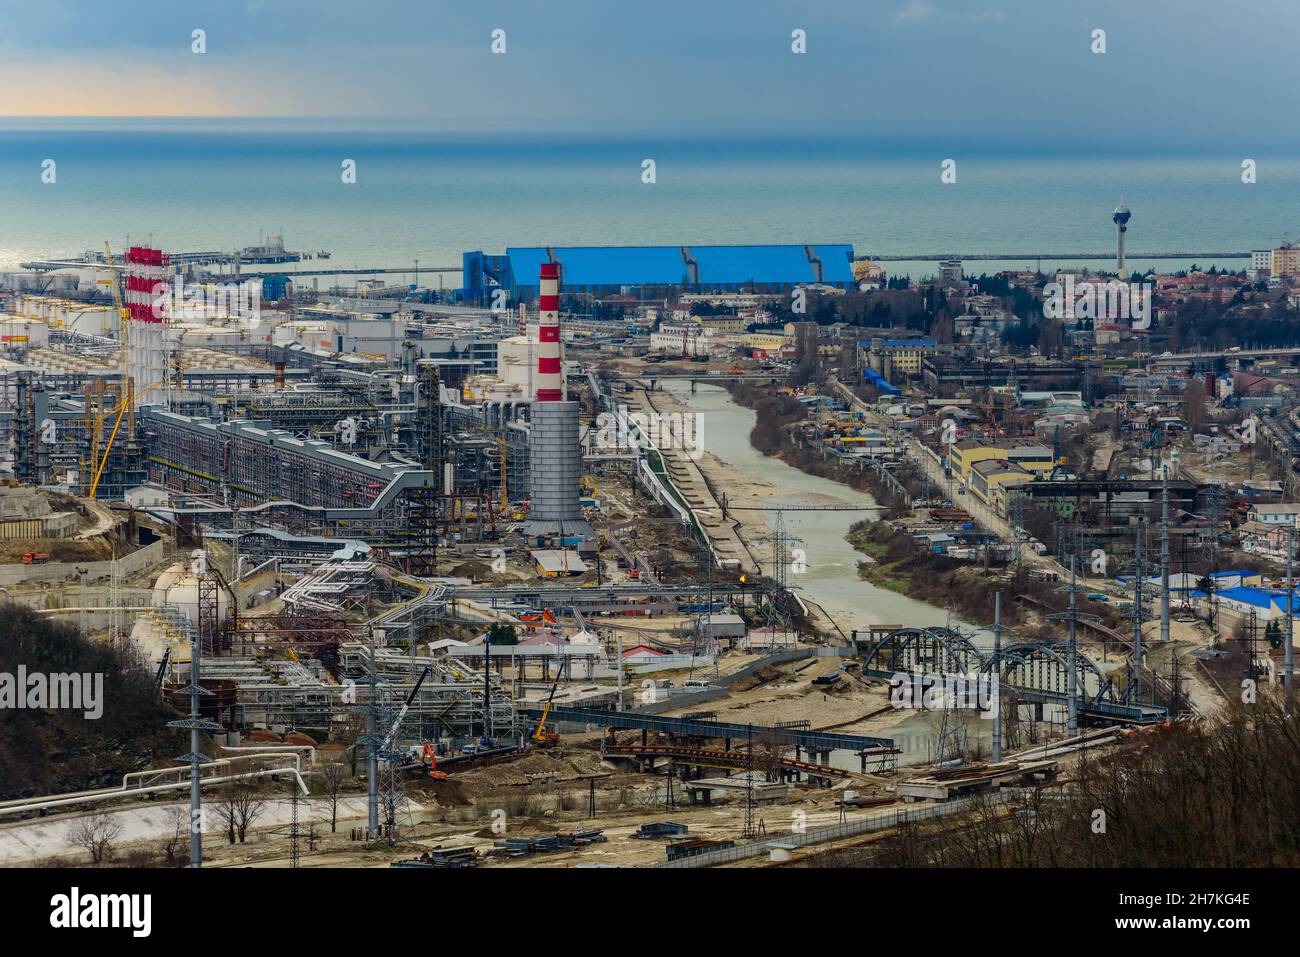 Russia, Tuapse, oil refinery and seaport, top view. Stock Photo